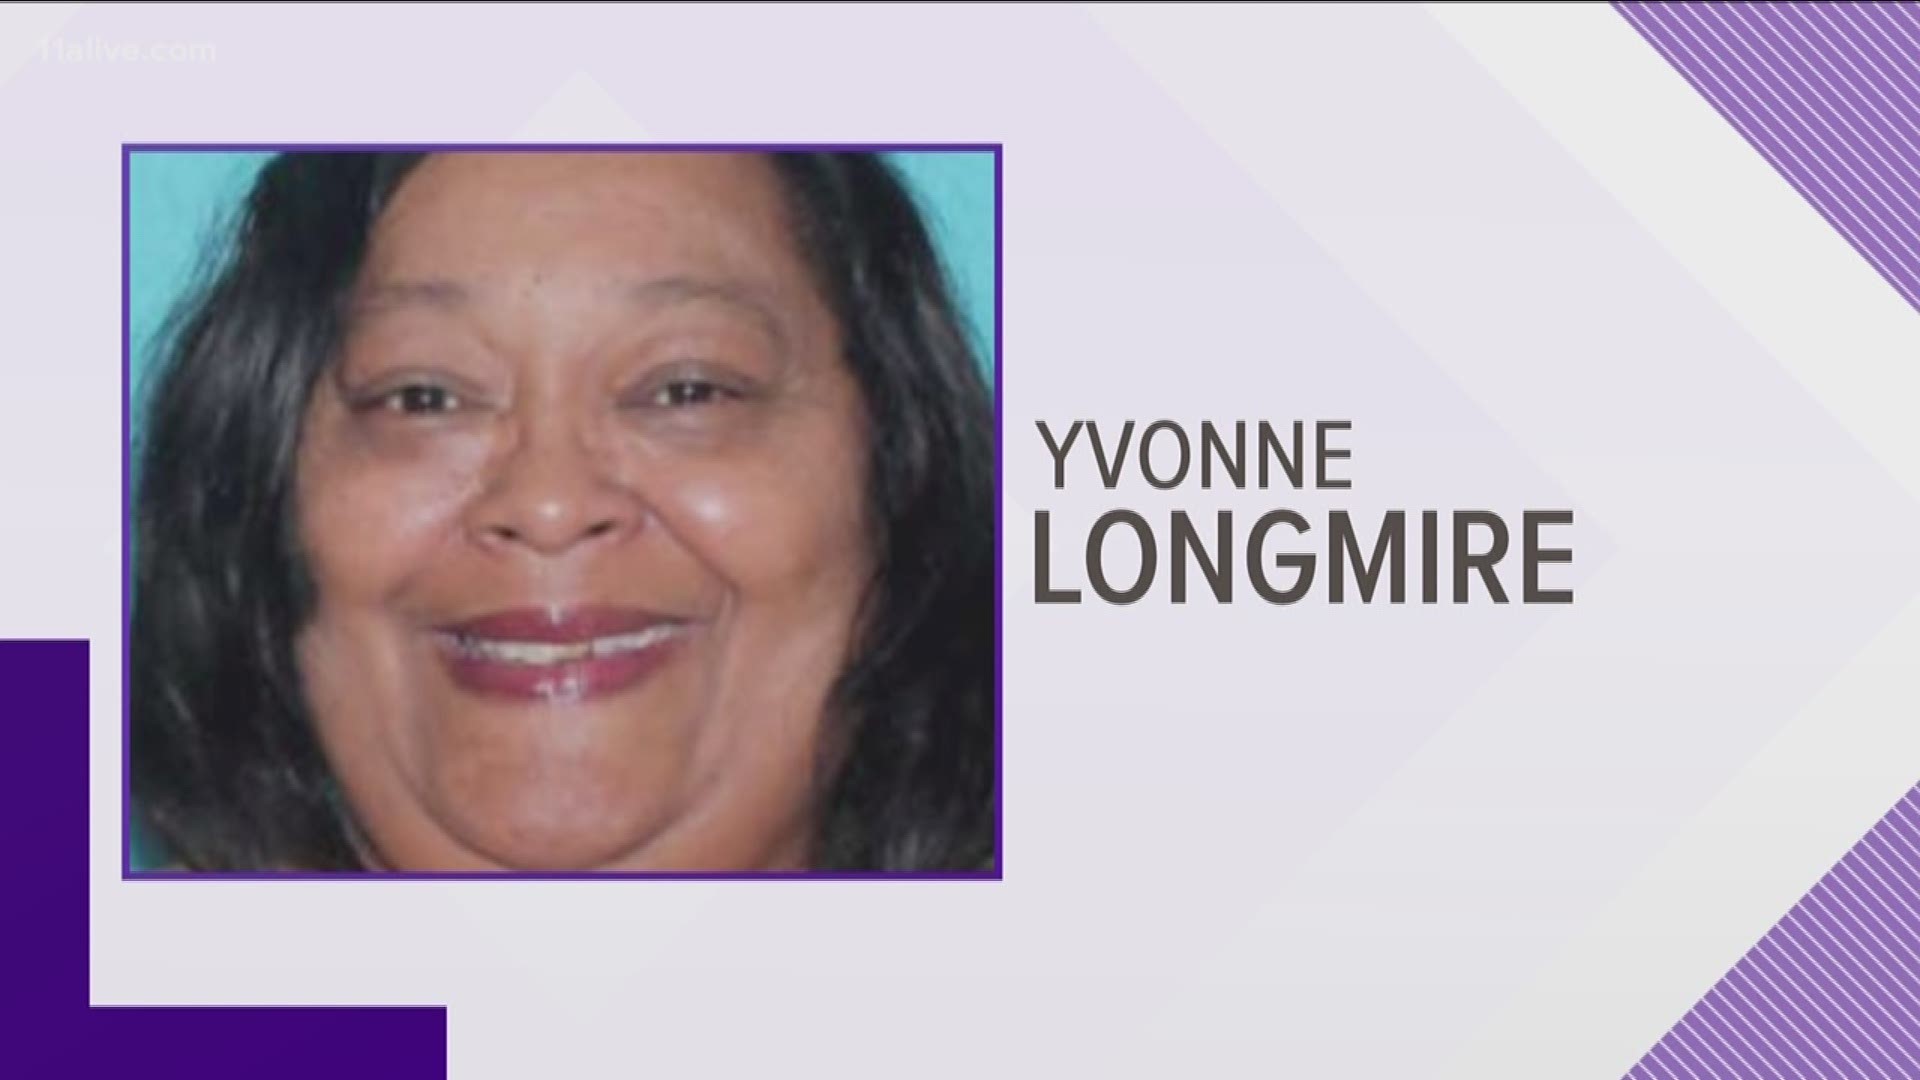 Yvonne Longmire, from Lawrenceville, surrendered to the Gwinnett County Detention Center on Friday, police said. She remains behind bars without bond on charges of perjury, forgery, identity theft, theft by deception, criminal solicitation and exploitation of an at-risk adult.